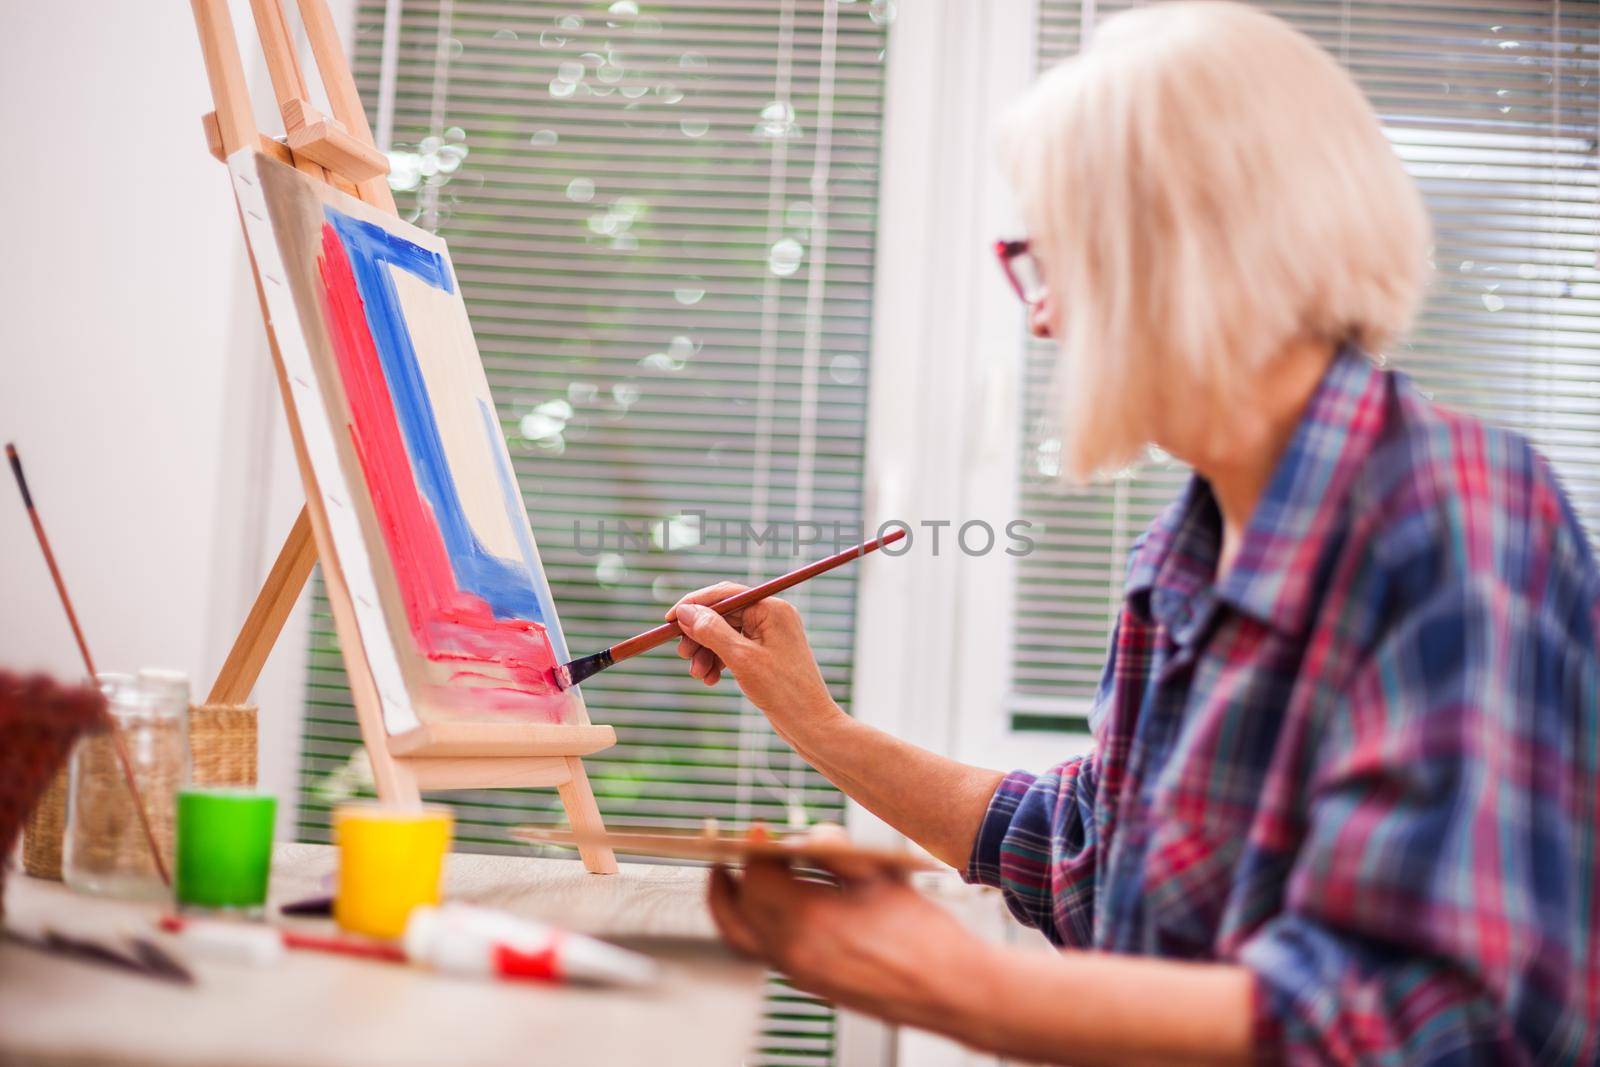 Elderly woman is painting in her home. Retirement hobby.